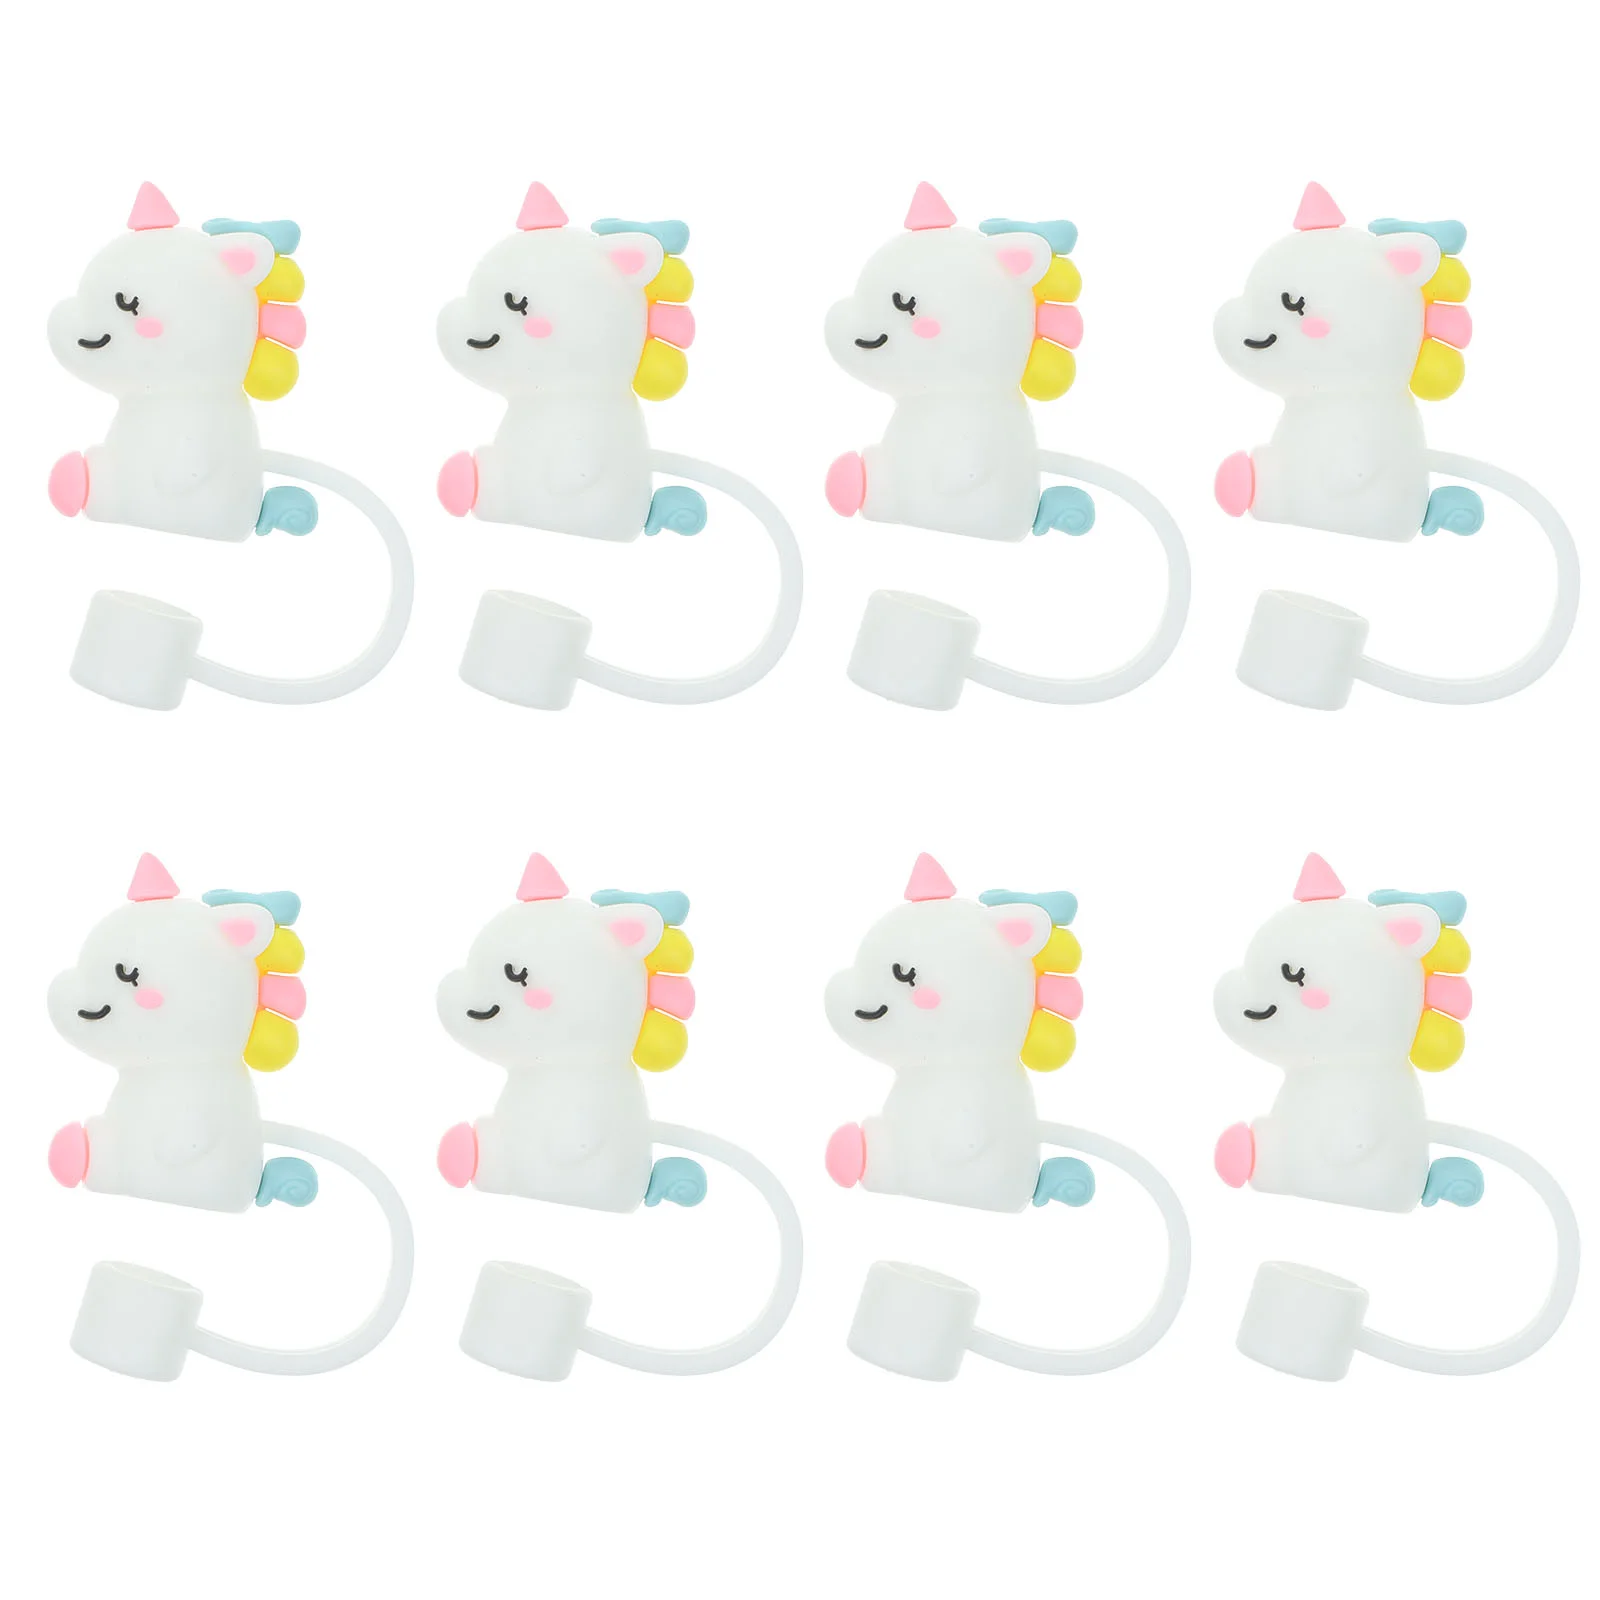 

8 Pcs Unicorn Straw Plugs Silicone Straws Reusable Caps Tips Stopper Covers Dust Silica Gel Lid Cute